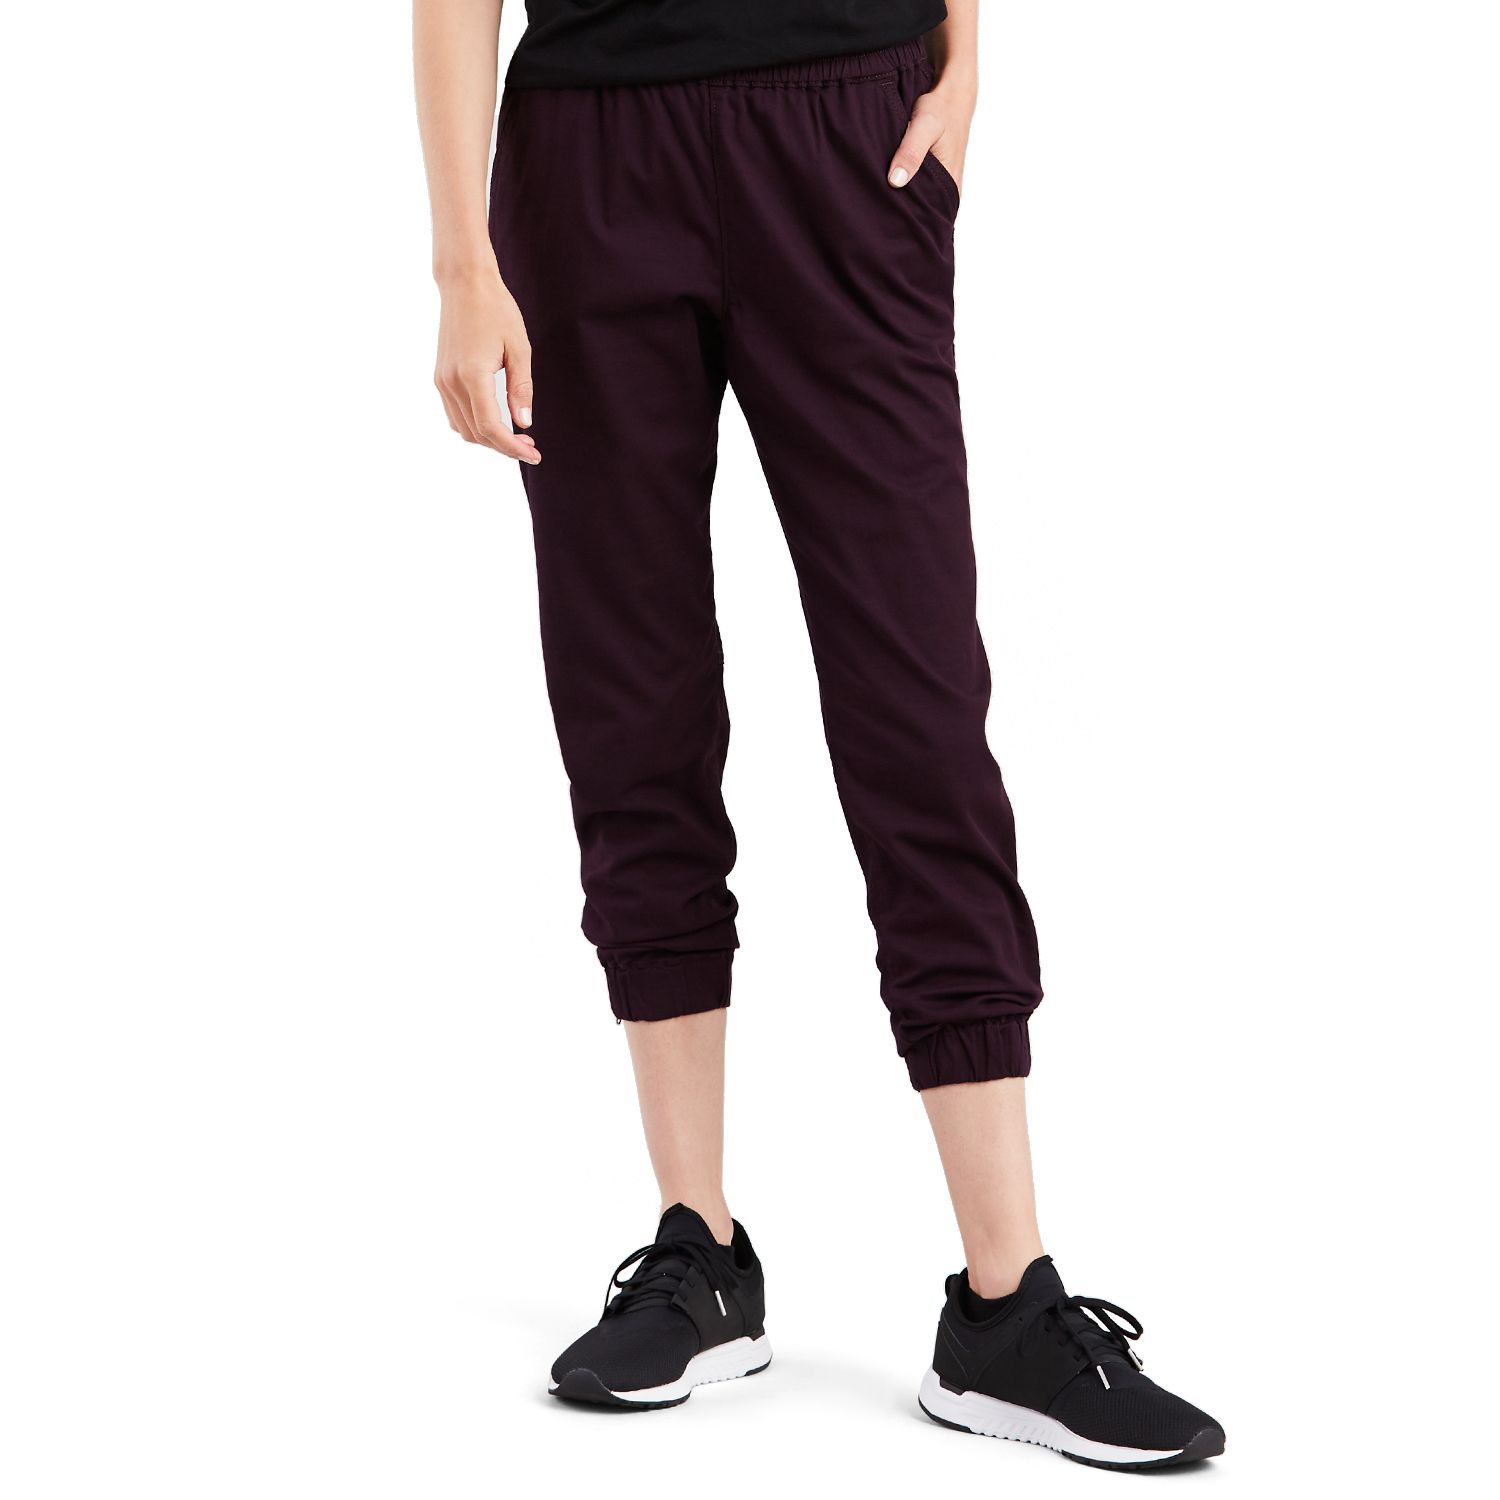 comfy tapered pants